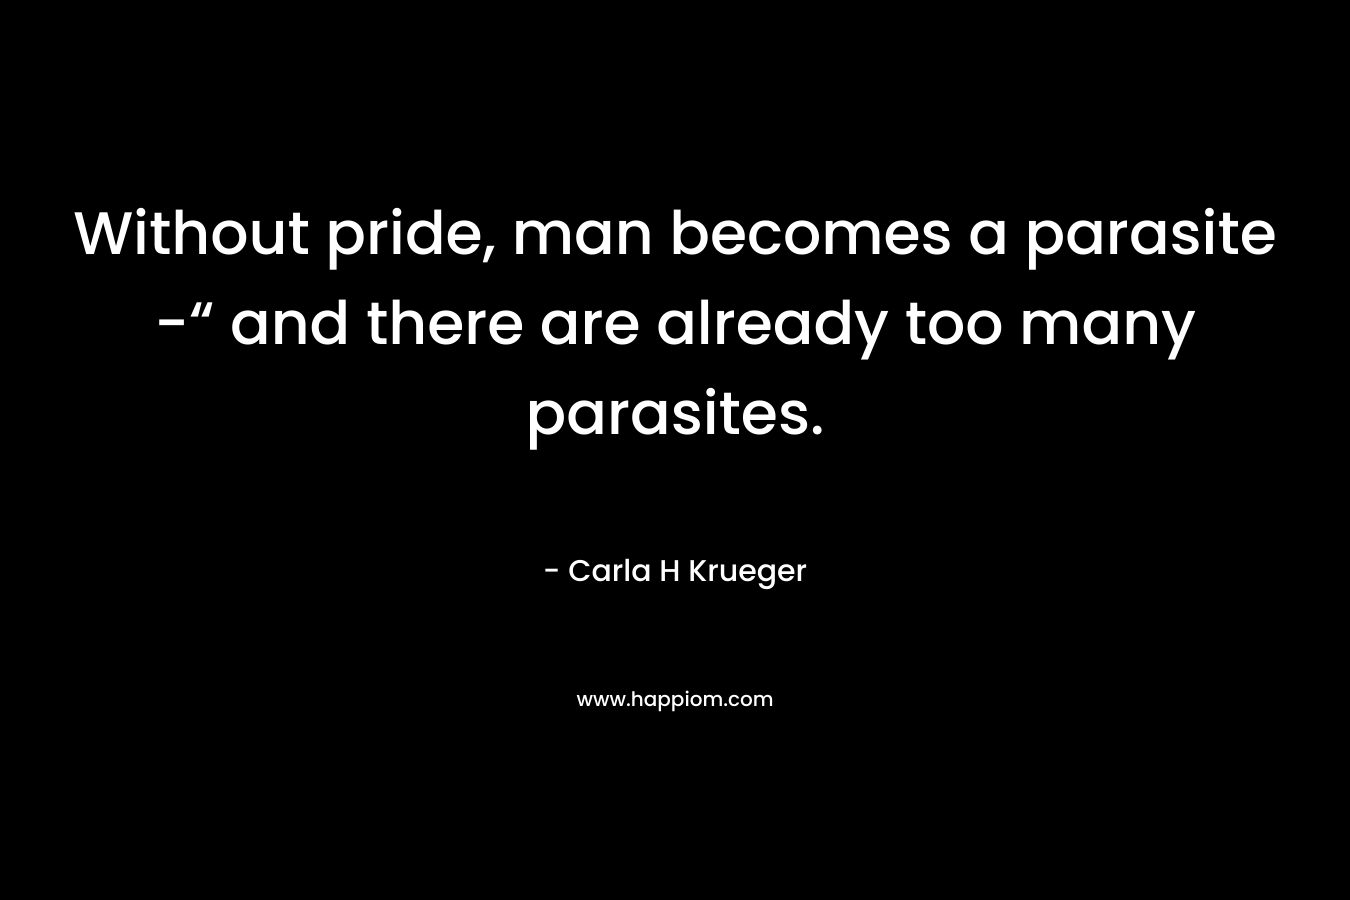 Without pride, man becomes a parasite -“ and there are already too many parasites. – Carla H Krueger